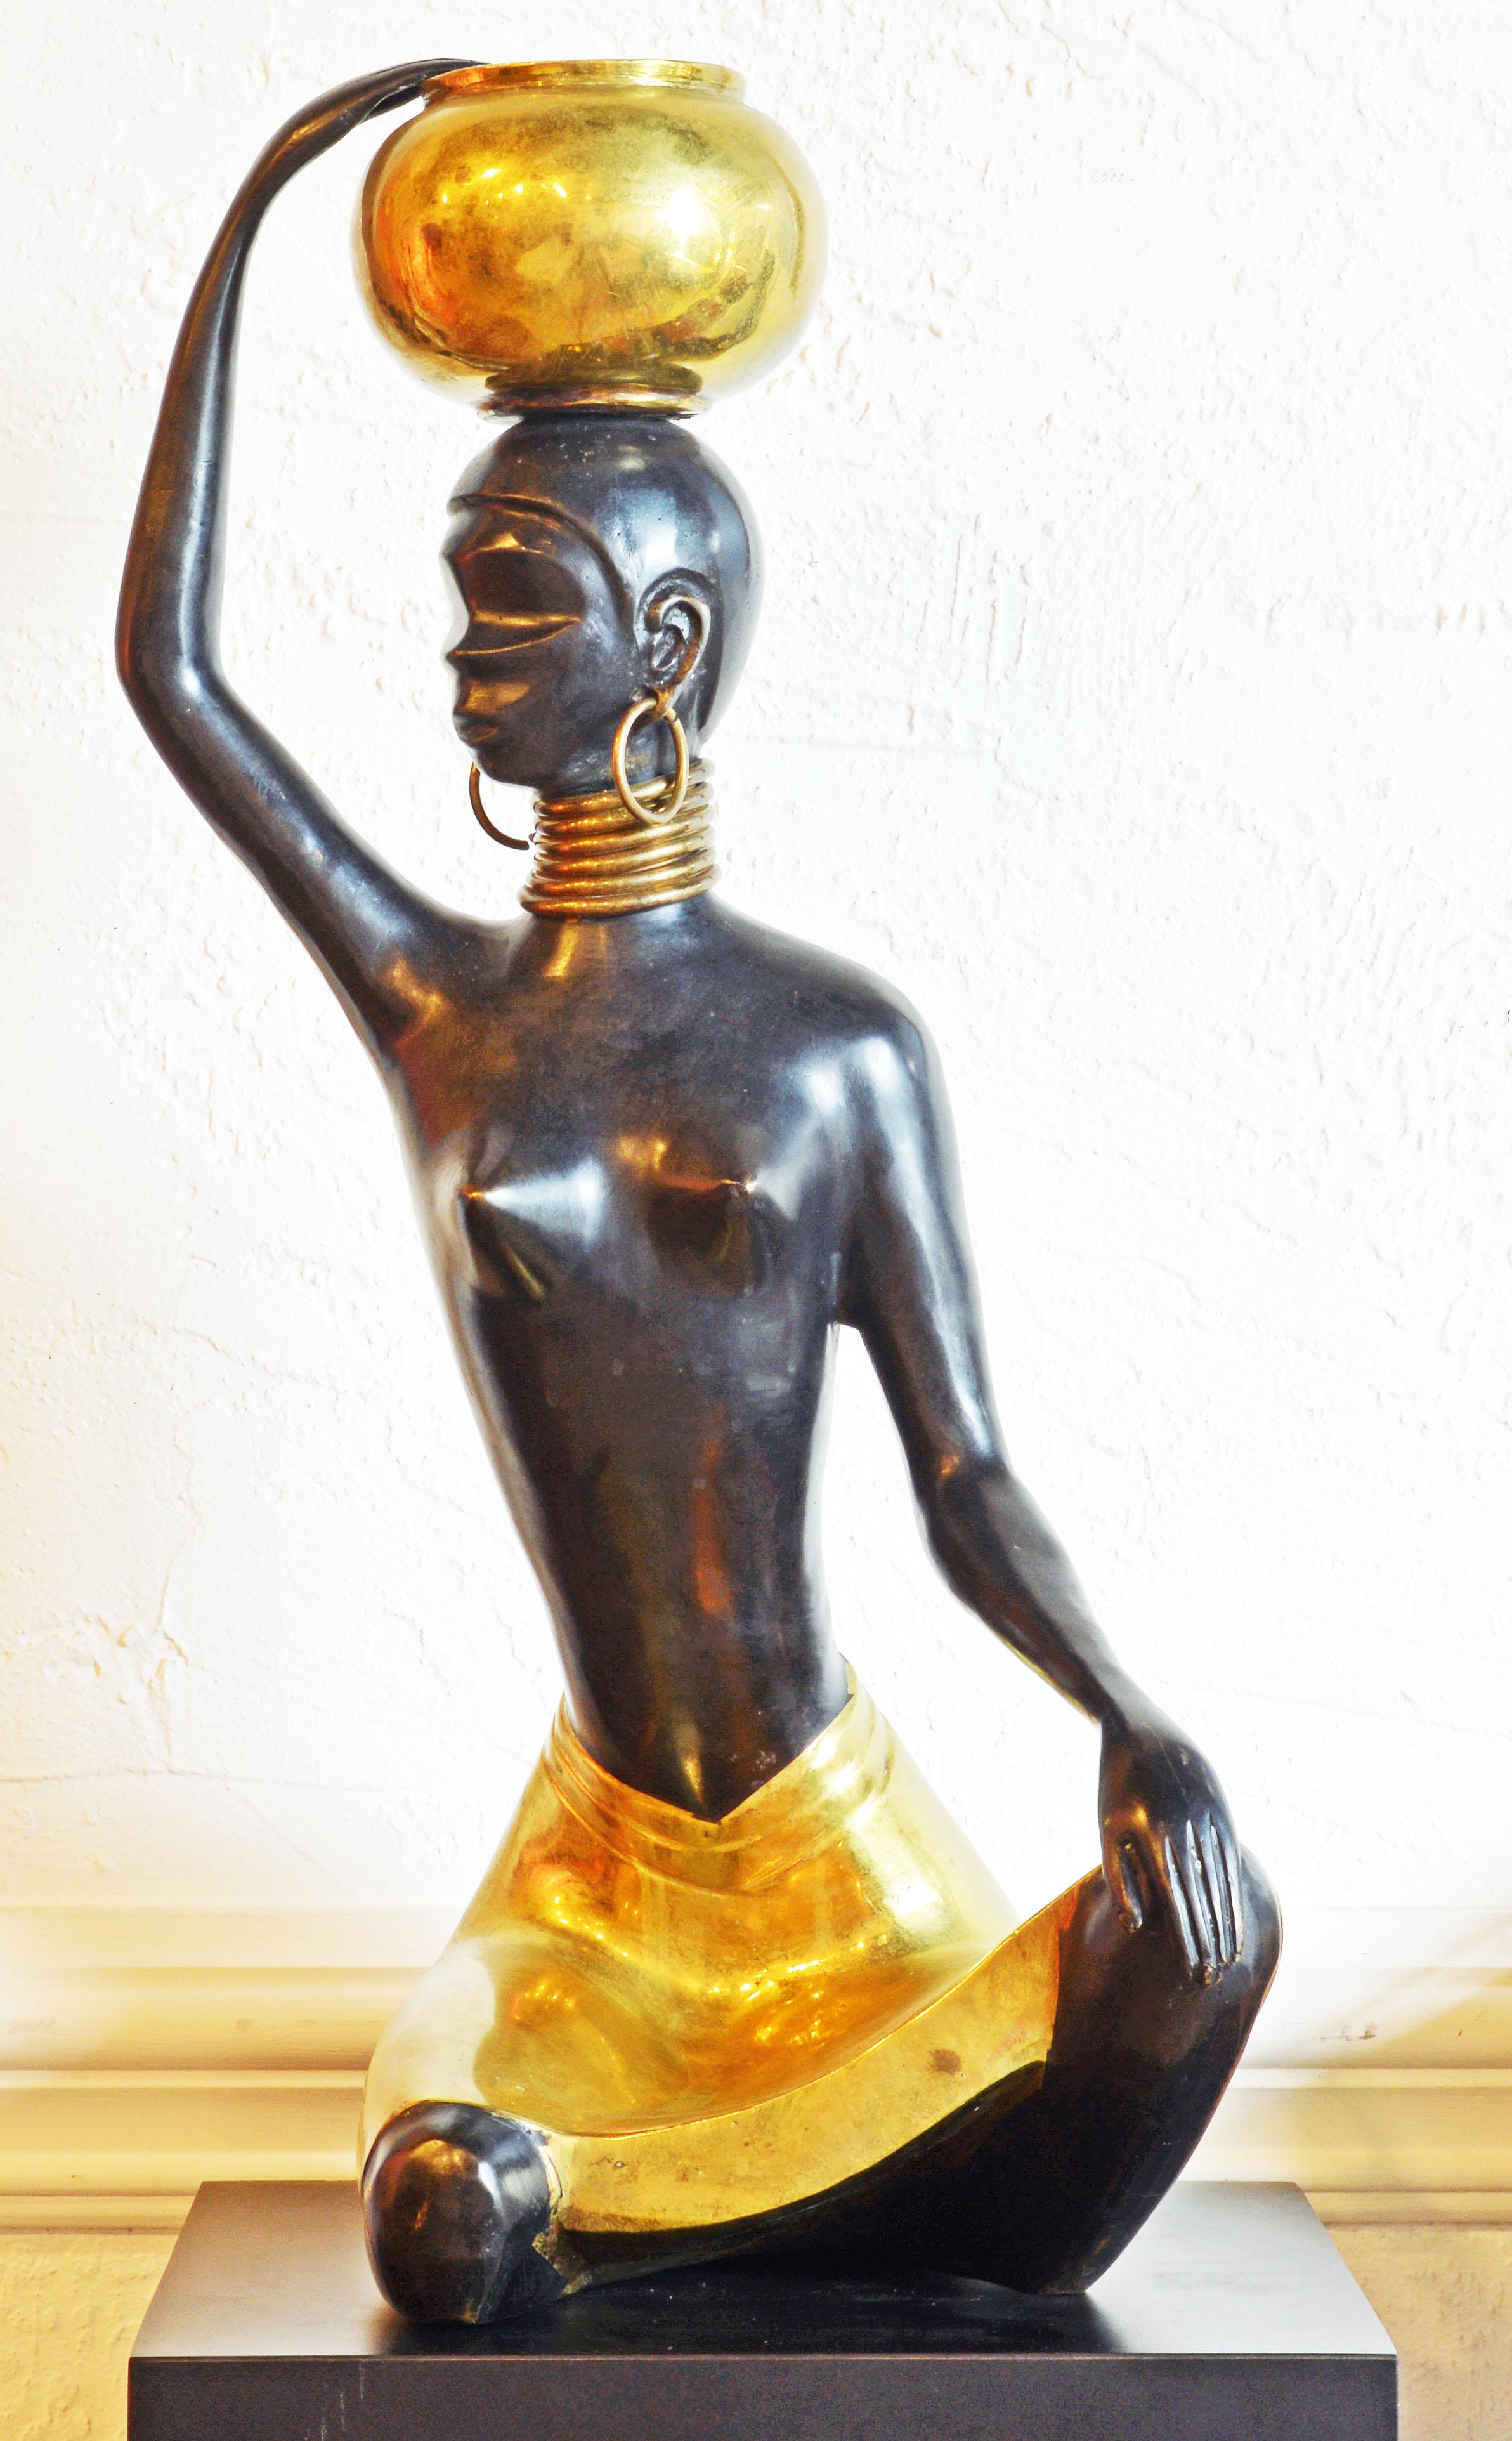 This Art Deco style patinated bronze and brass sculpture reminiscent of Hagenauer's style features a young African woman sitting in a brass skirt legs crossed with her right hand balancing a brass vessel on top of her head. The face, hands and